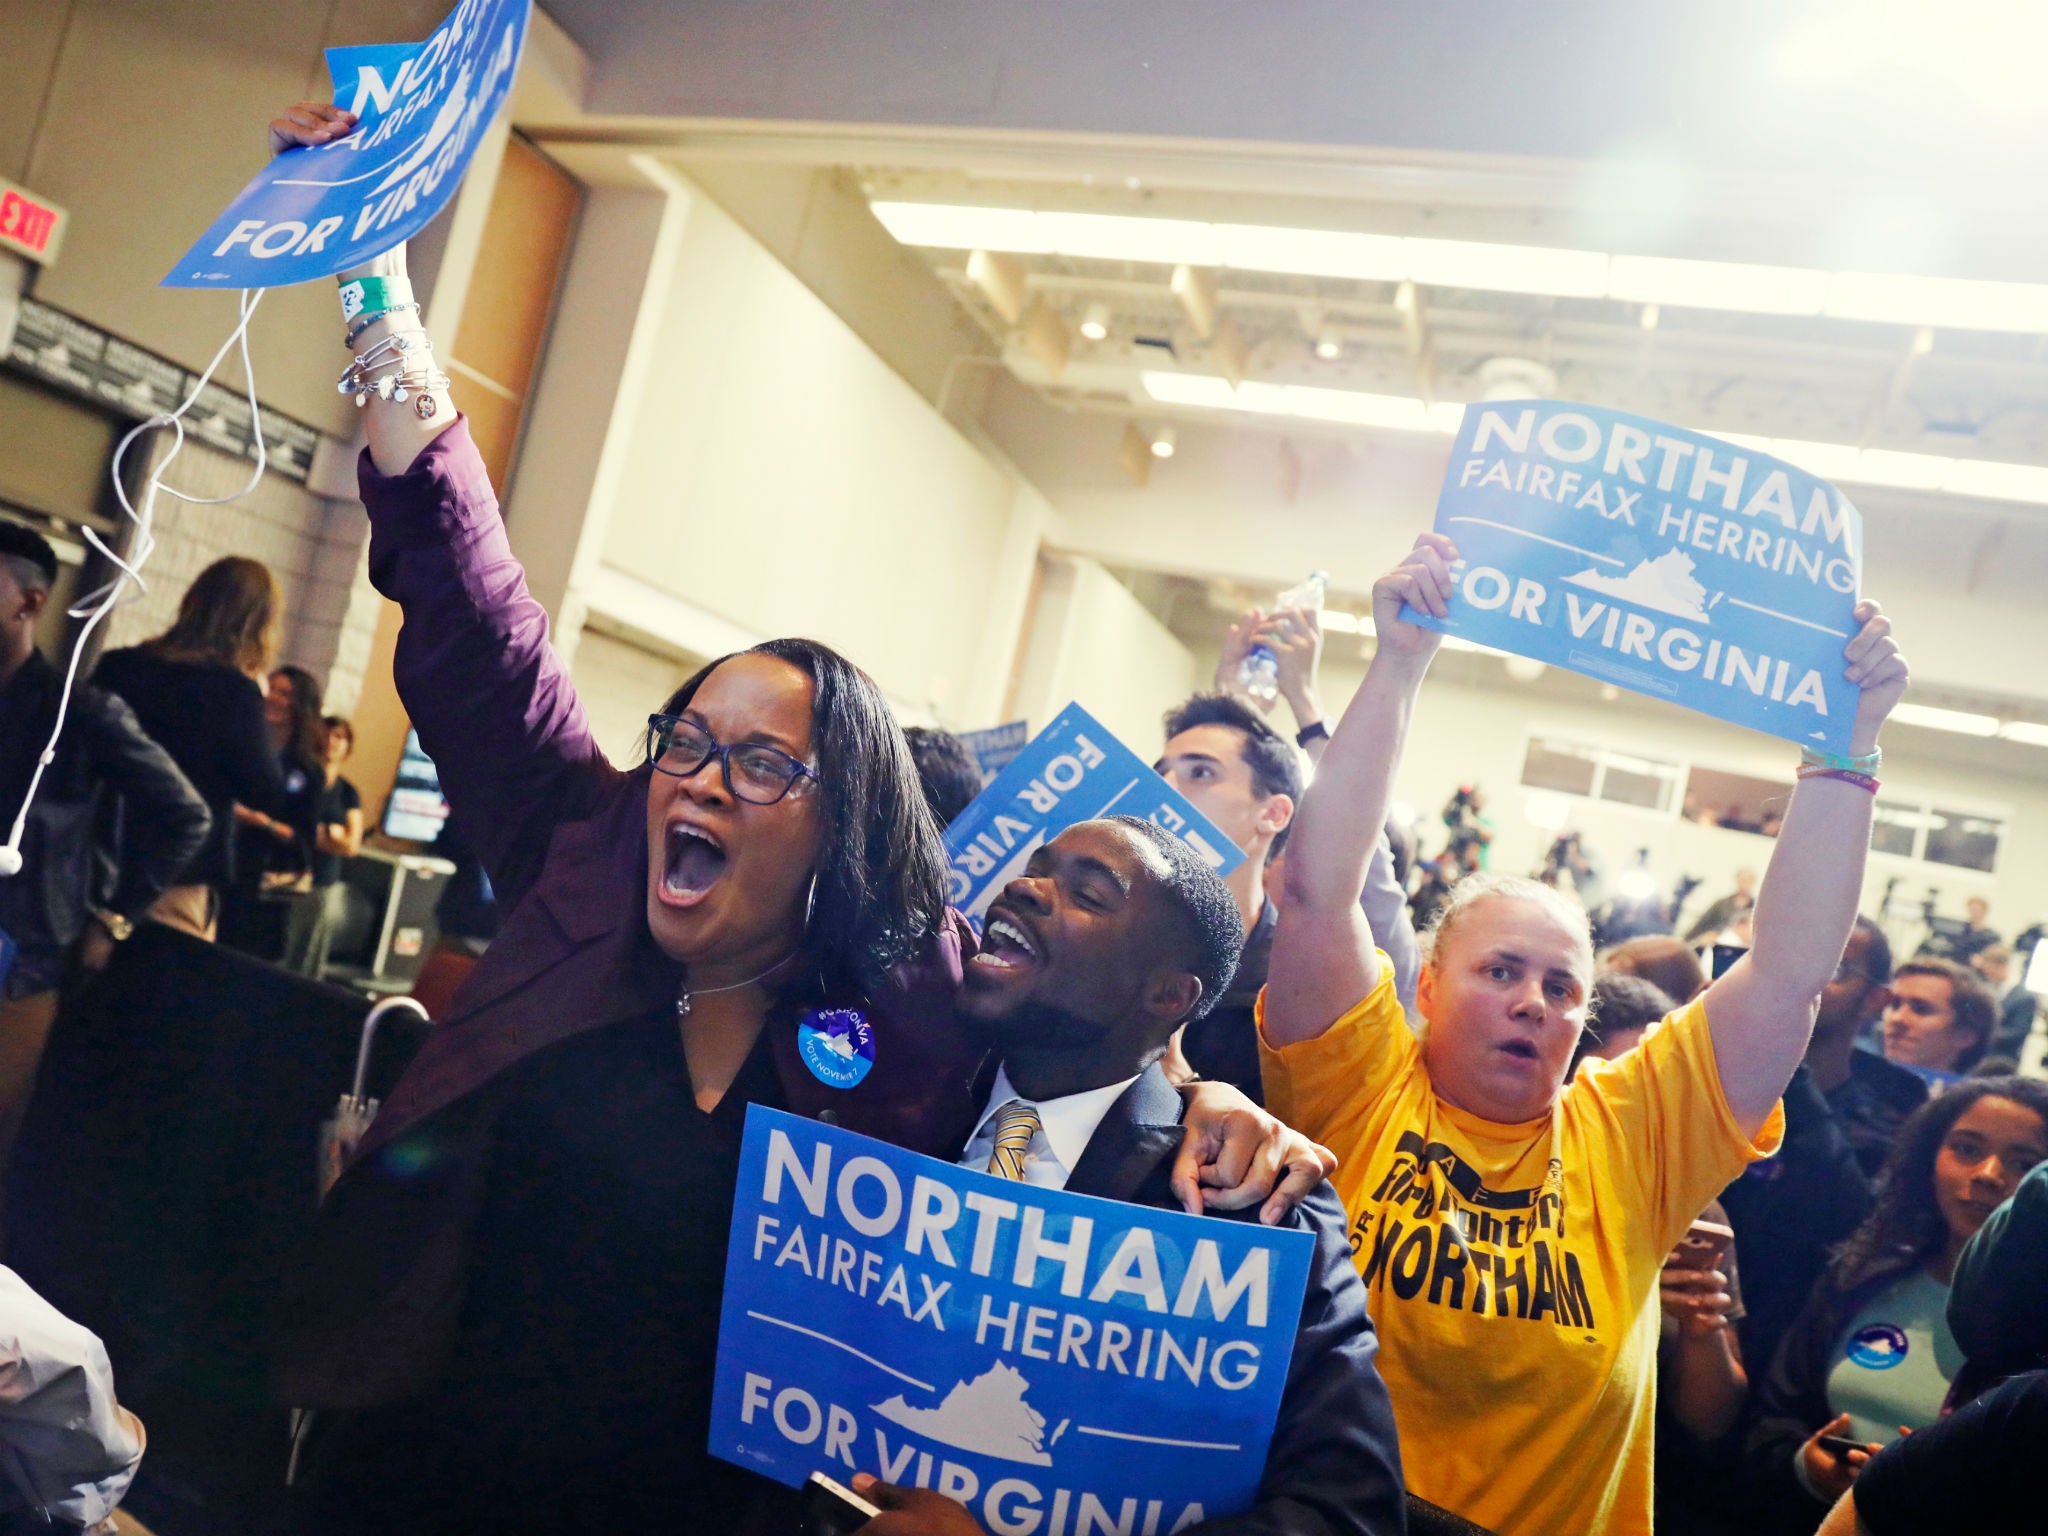 Supporters of Ralph Northam begin to celebrate as results start to come in at Northam's election night rally on the campus of George Mason University in Fairfax, Virginia, November 7, 2017